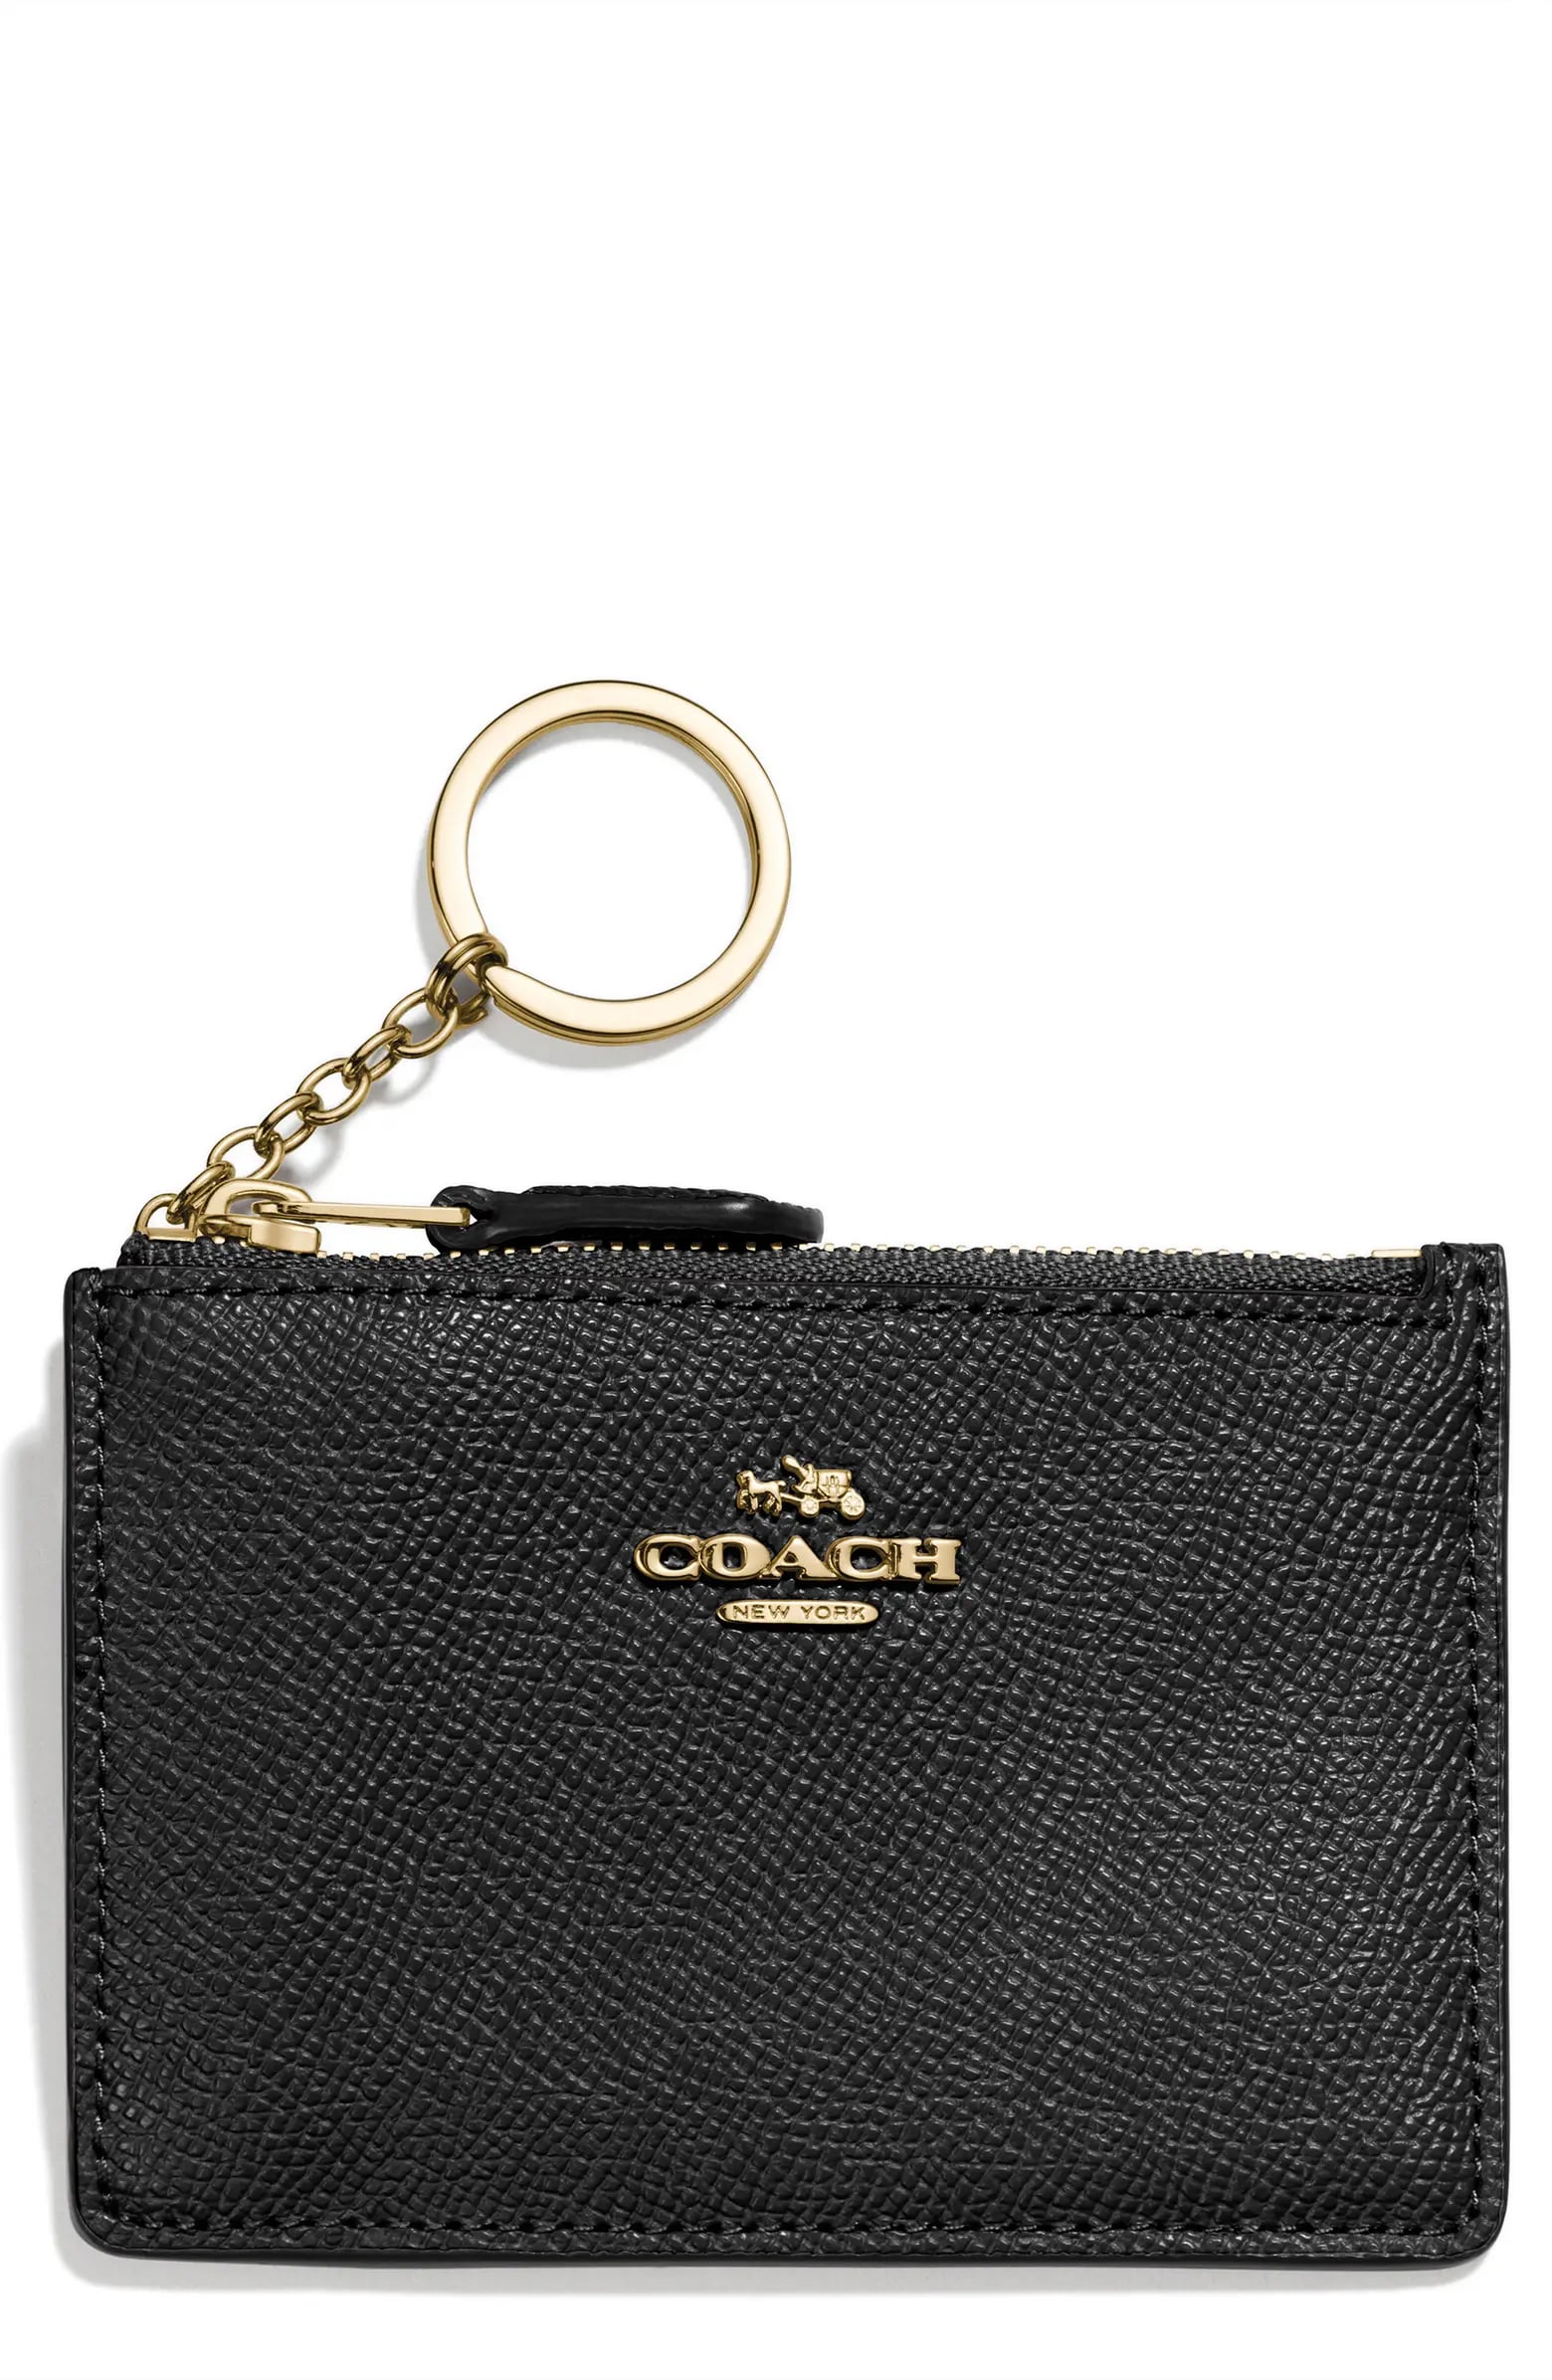  Women's Card Cases - COACH / Women's Card Cases / Women's Card  & ID Cases: Clothing, Shoes & Jewelry